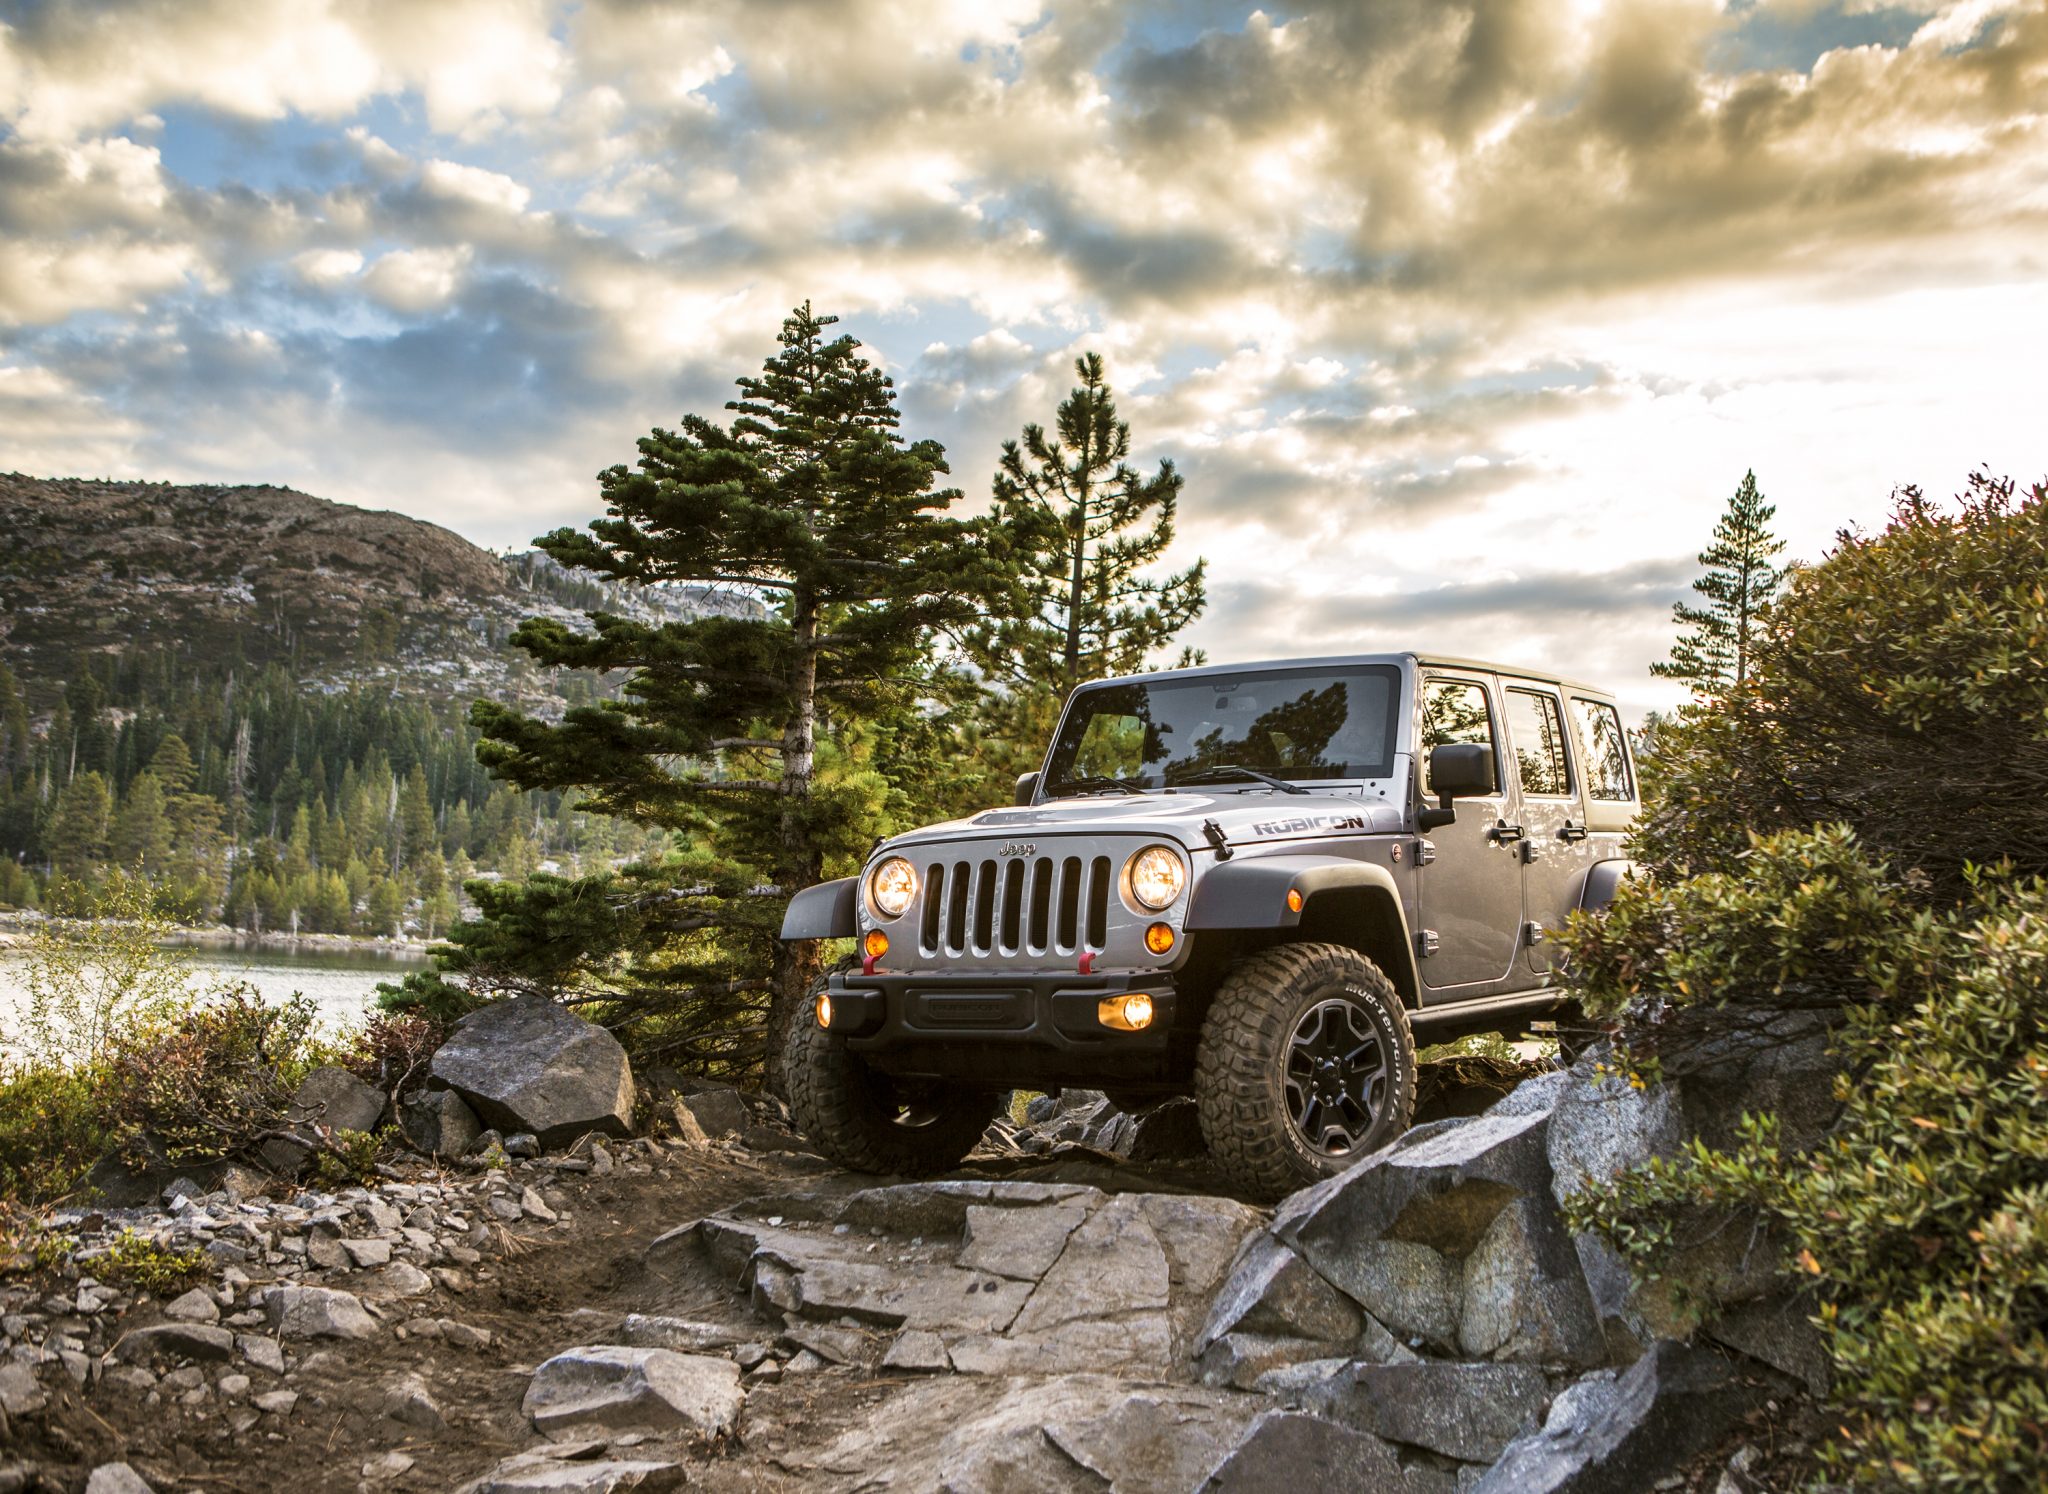  Lists Pros and Cons of Driving a Jeep Wrangler - The News Wheel